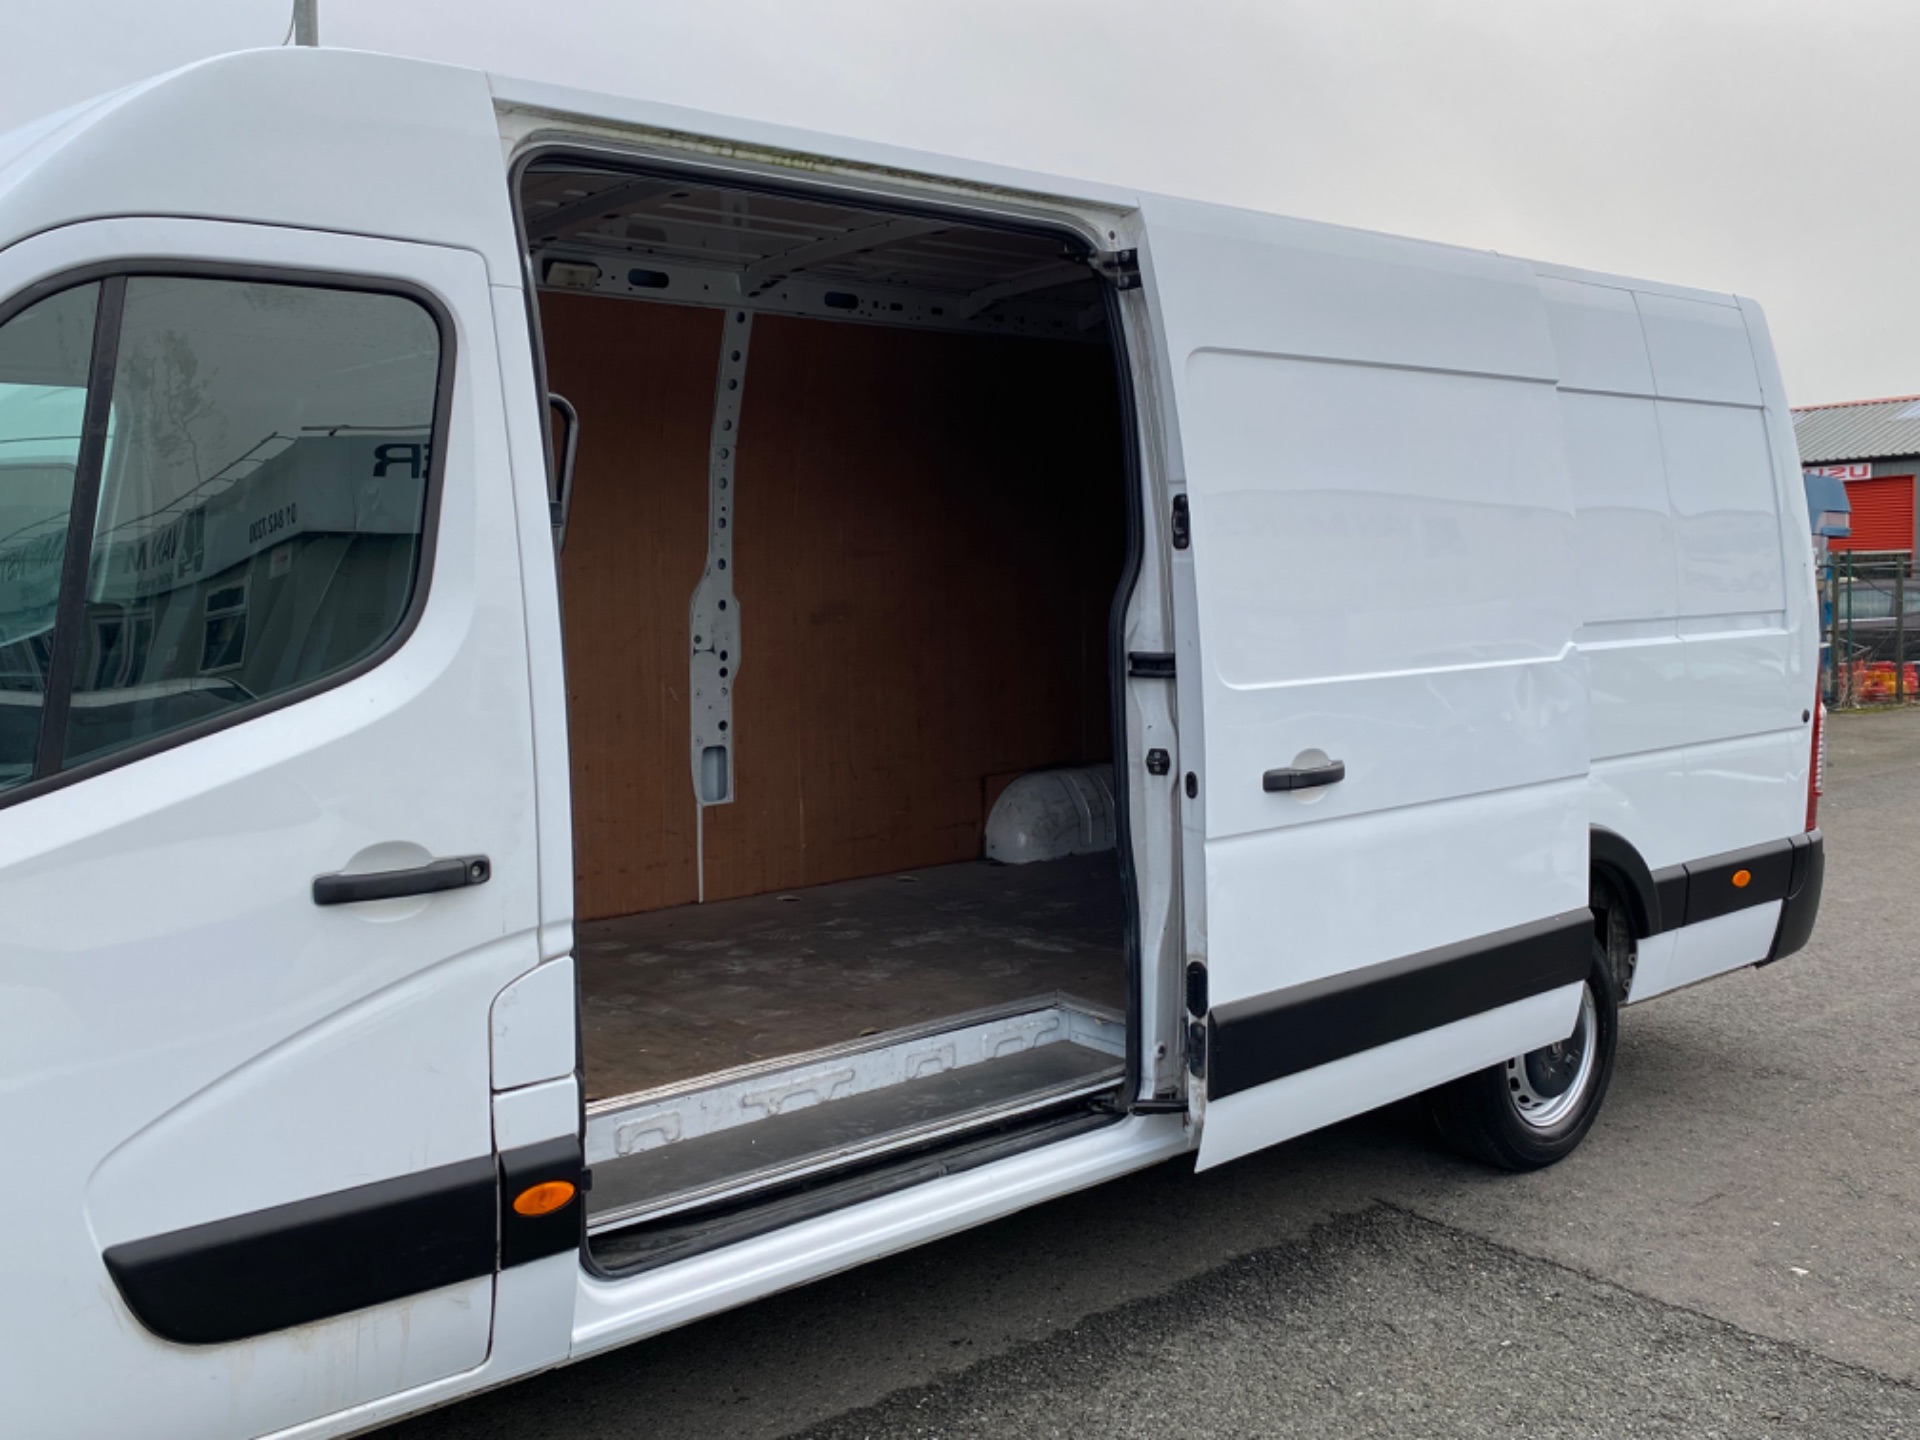 2020 Renault Master RWD LML35 DCI 130 Business MY1 (201D9384) Image 13